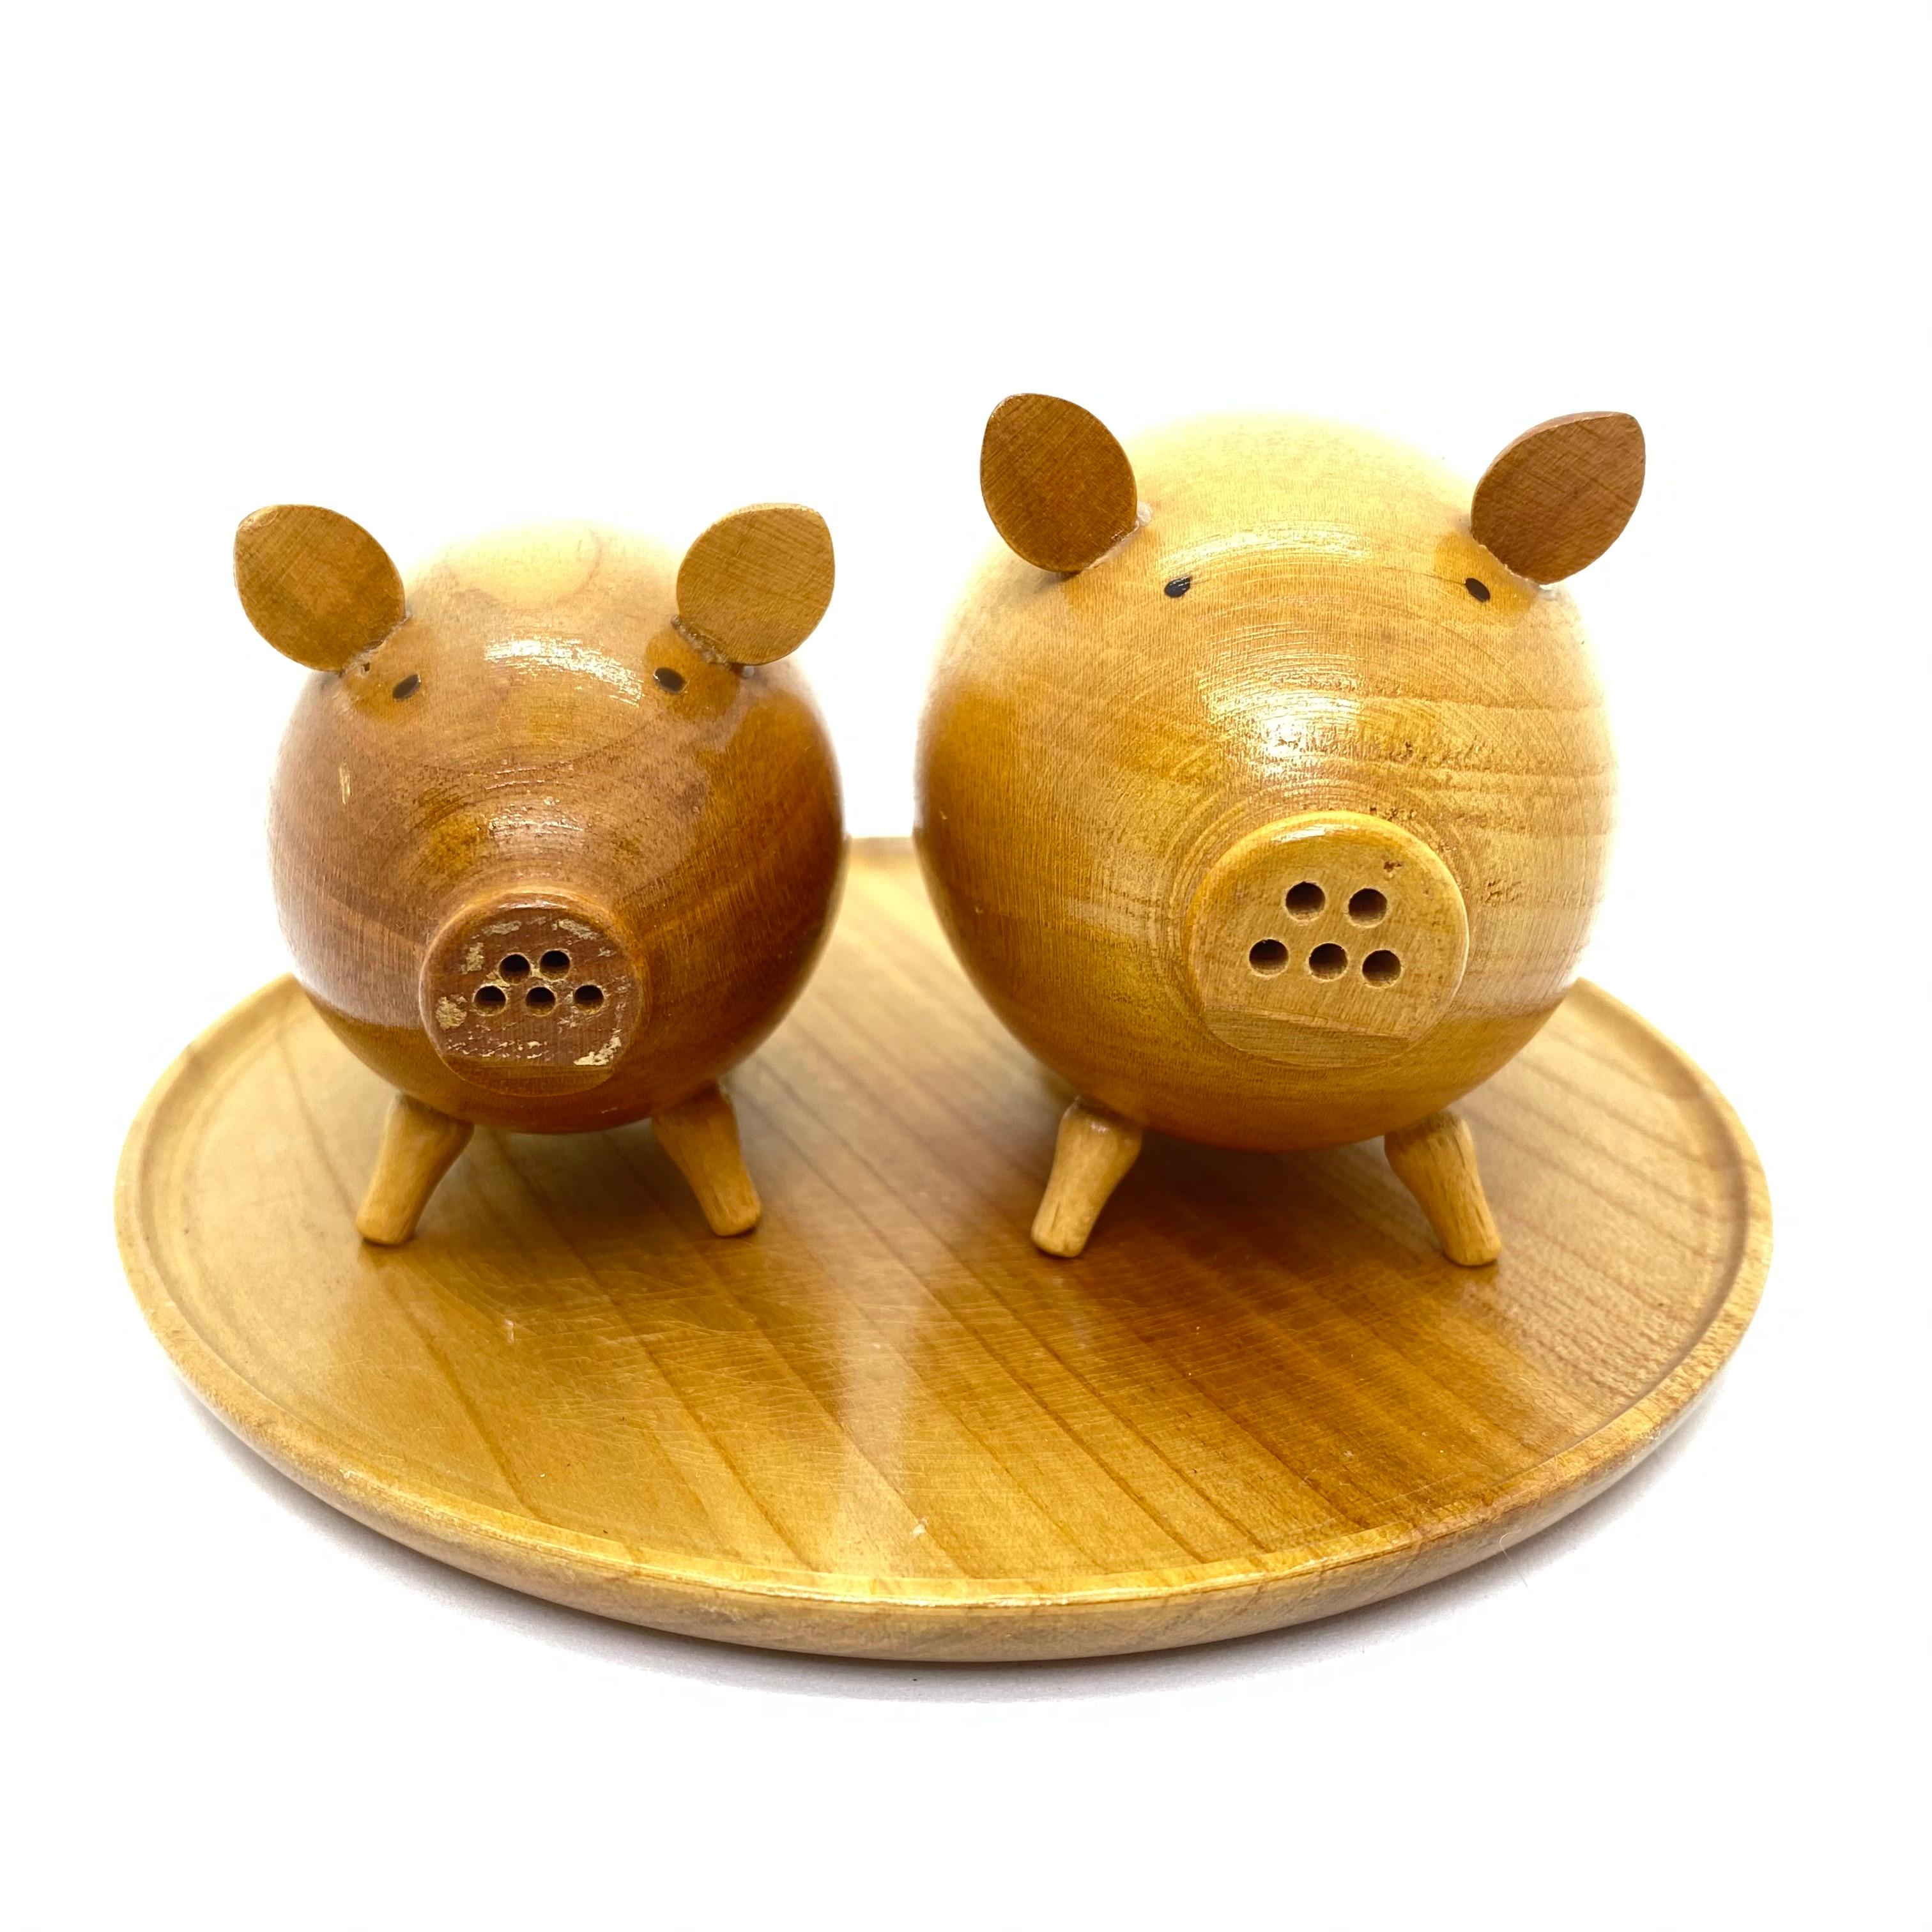 Classic early 1960s Danish design wood salt and pepper shaker set of two in the form of a pig. Nice addition to your table or just for your collection of Design items. Made of wood. Found at an estate sale in Vienna, Austria. The tall one is